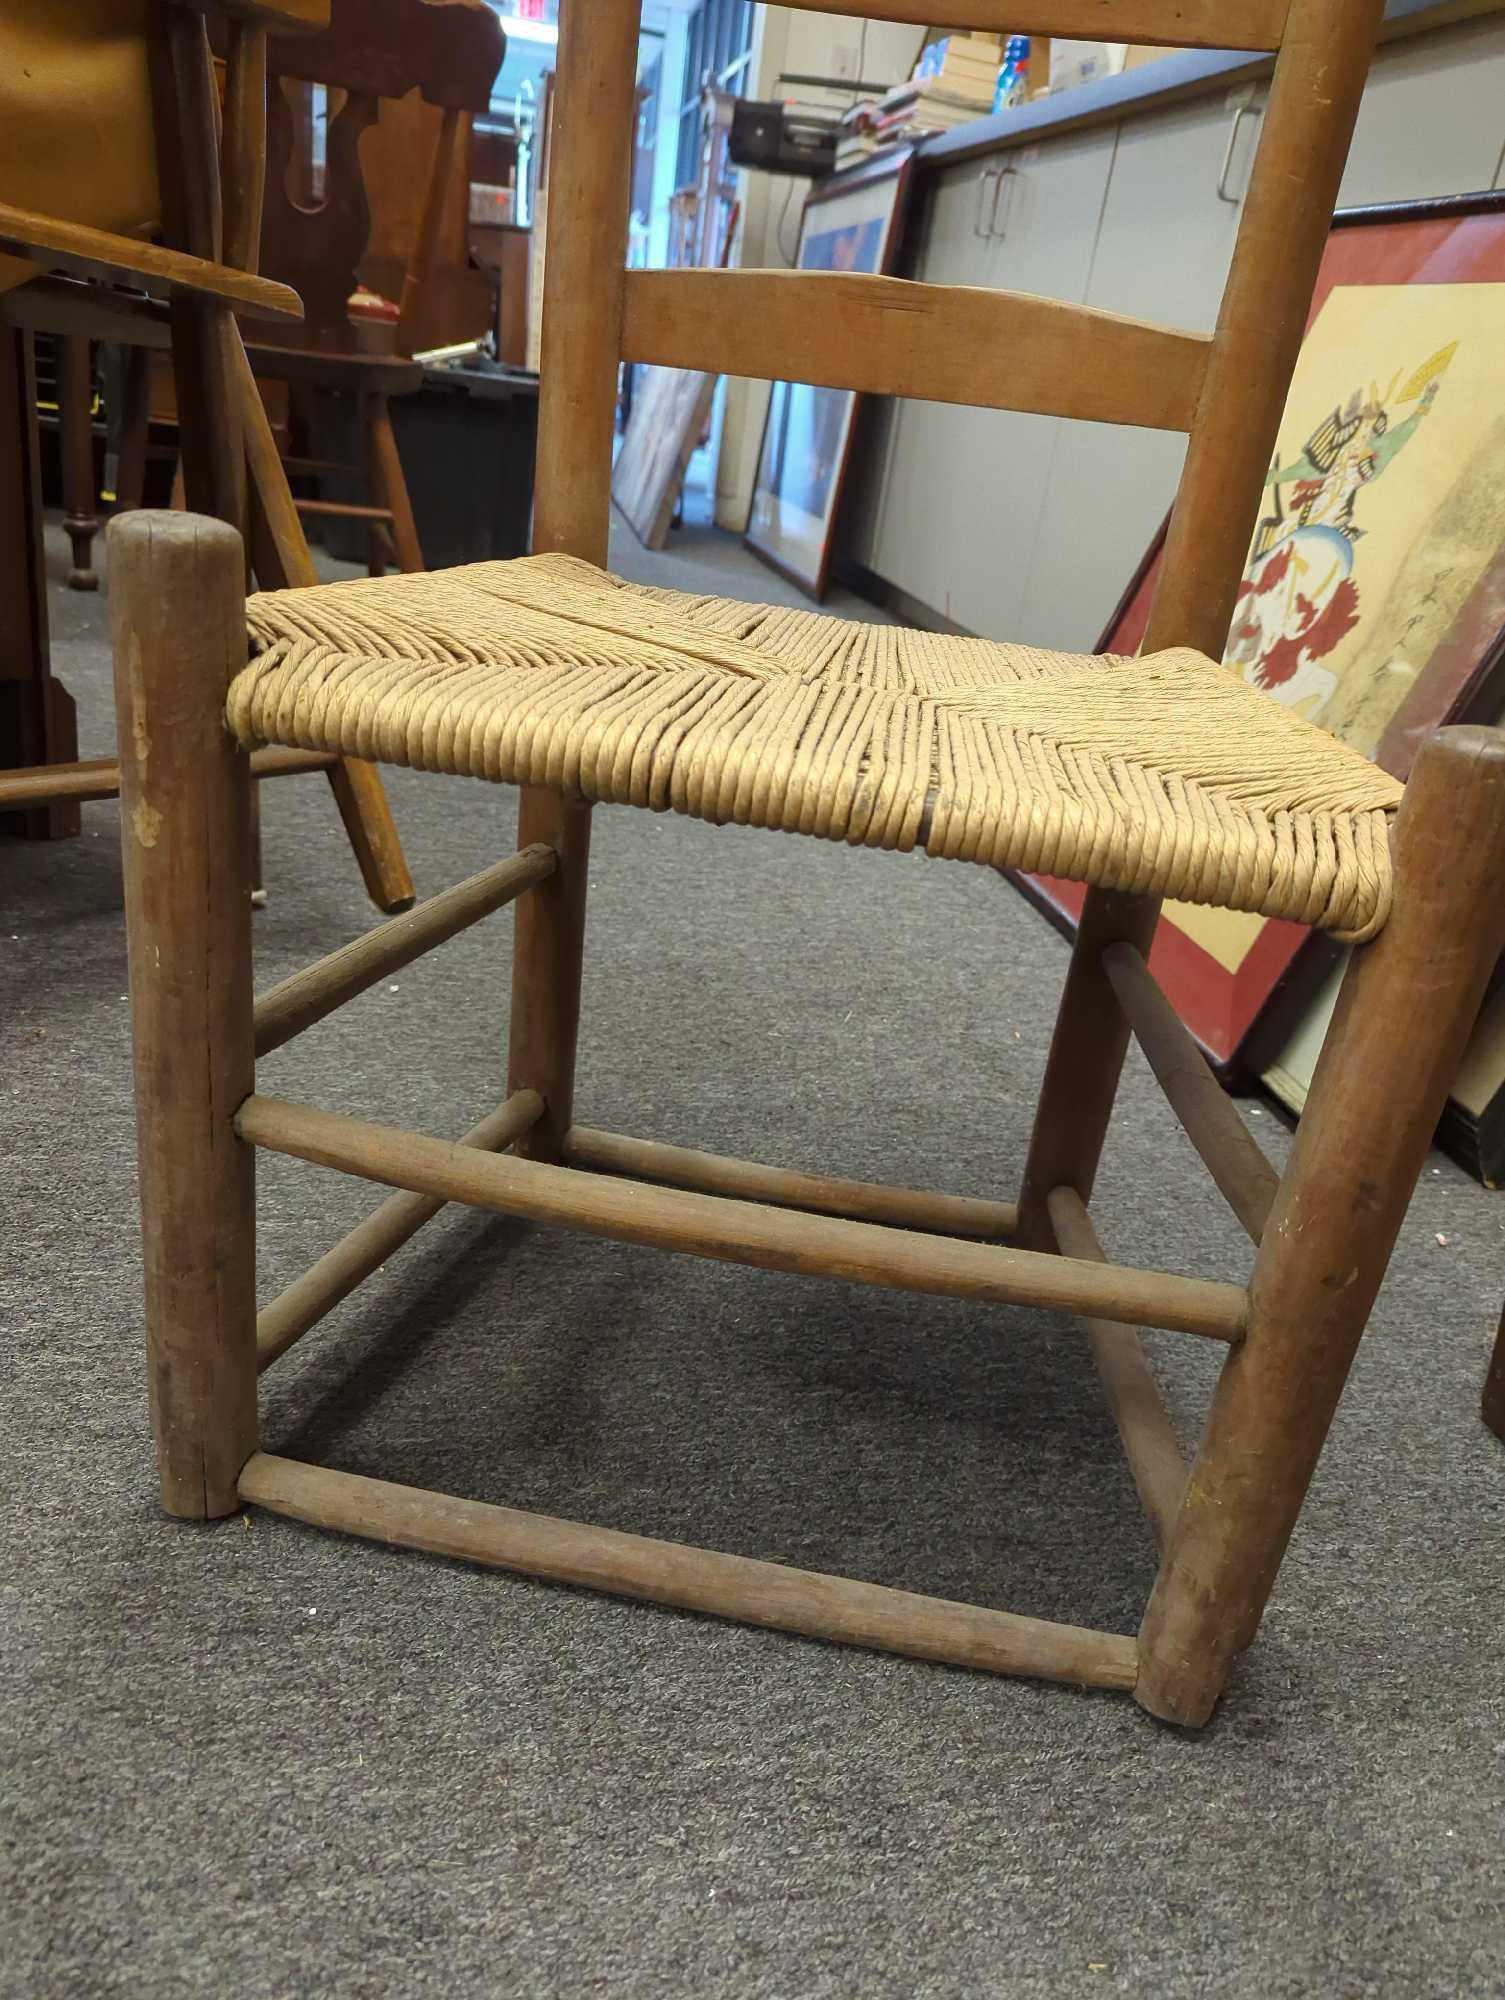 Replica of a Colonial Chair Primitive ANTIQUE 18th Century Wooden Ladder Back Chair 1750s, Item